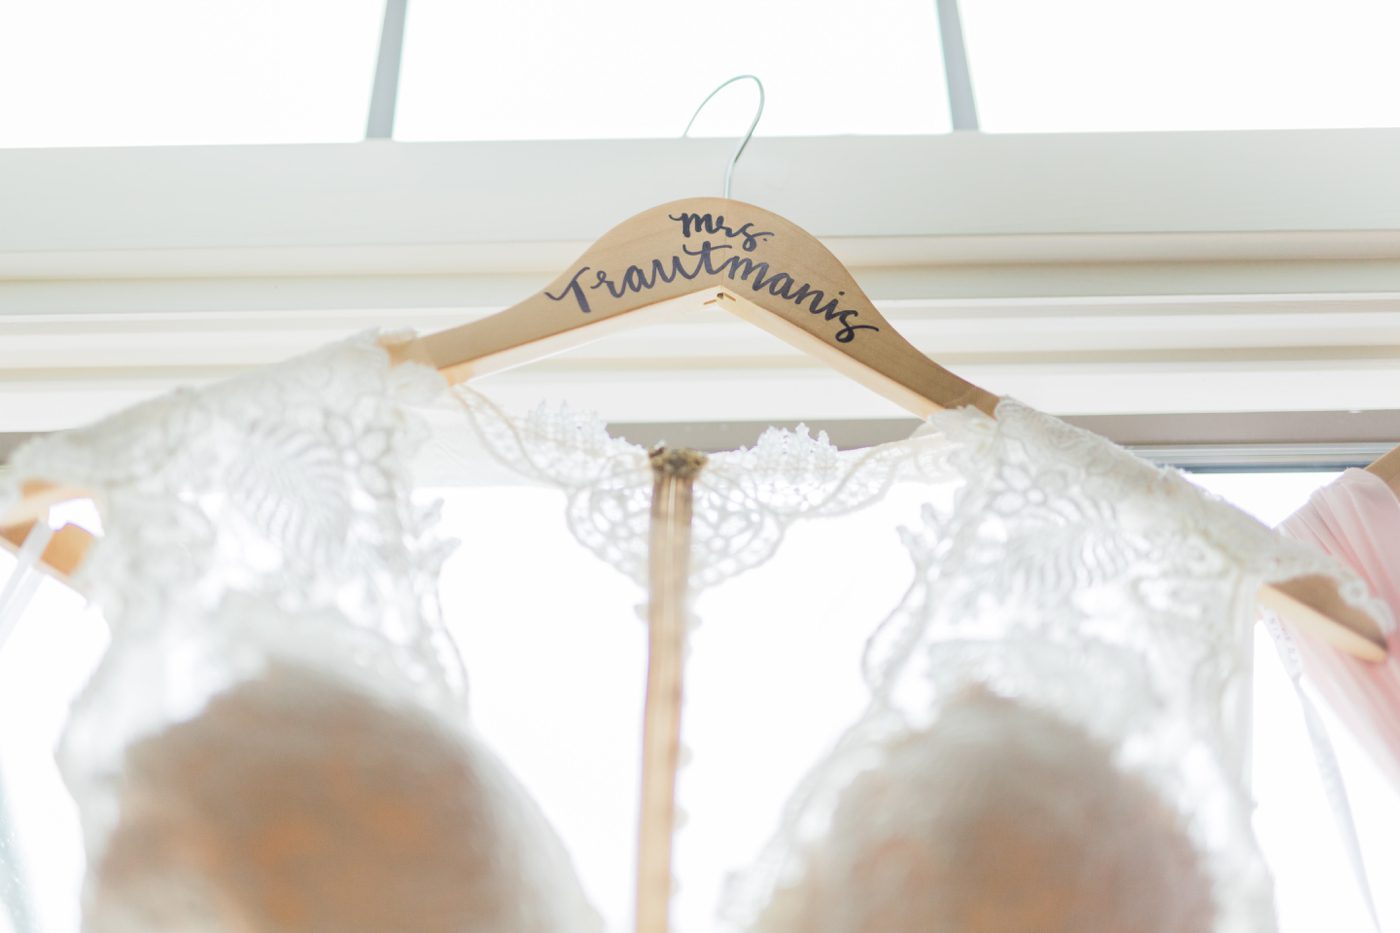 Customized wedding dress hanger with brides new last name